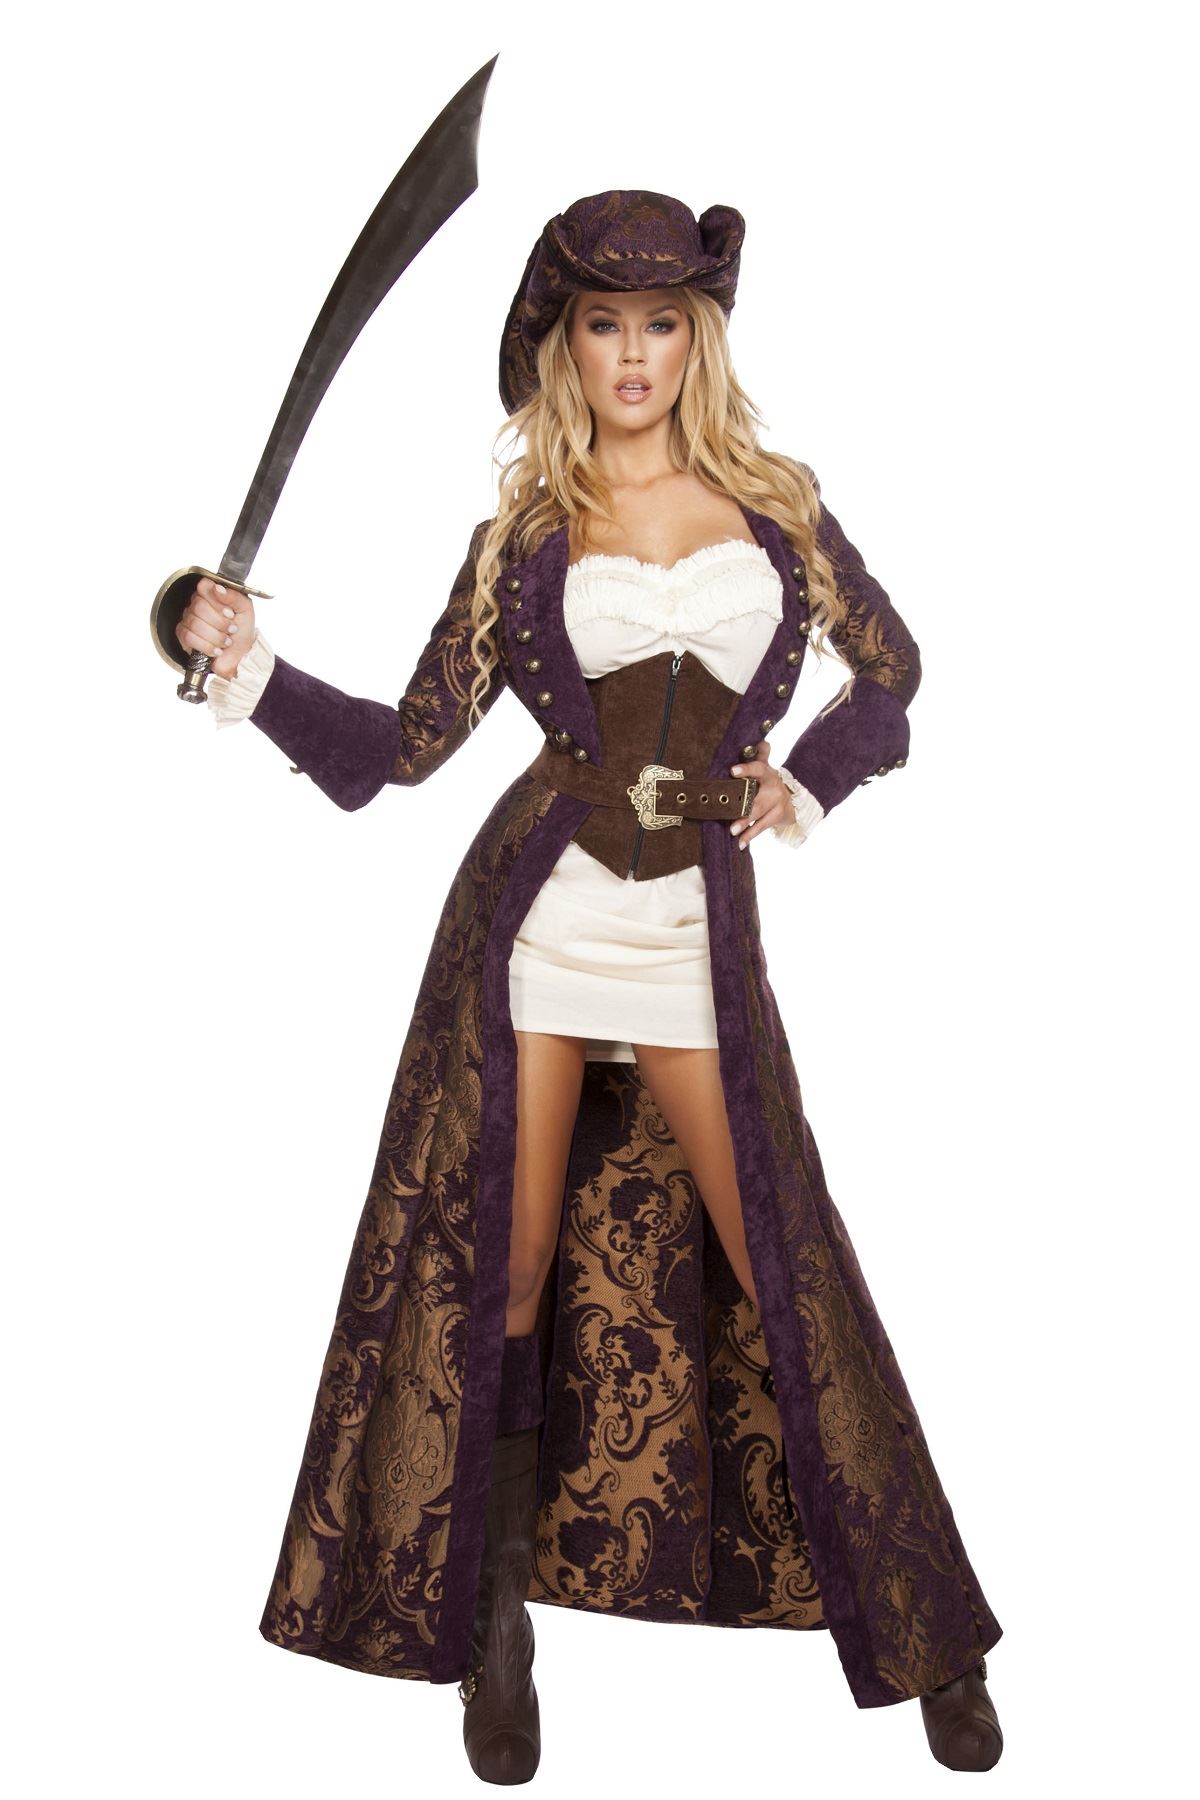 Adult Decadent Pirate Diva Woman Deluxe Costume 22999 The Costume Land 8284